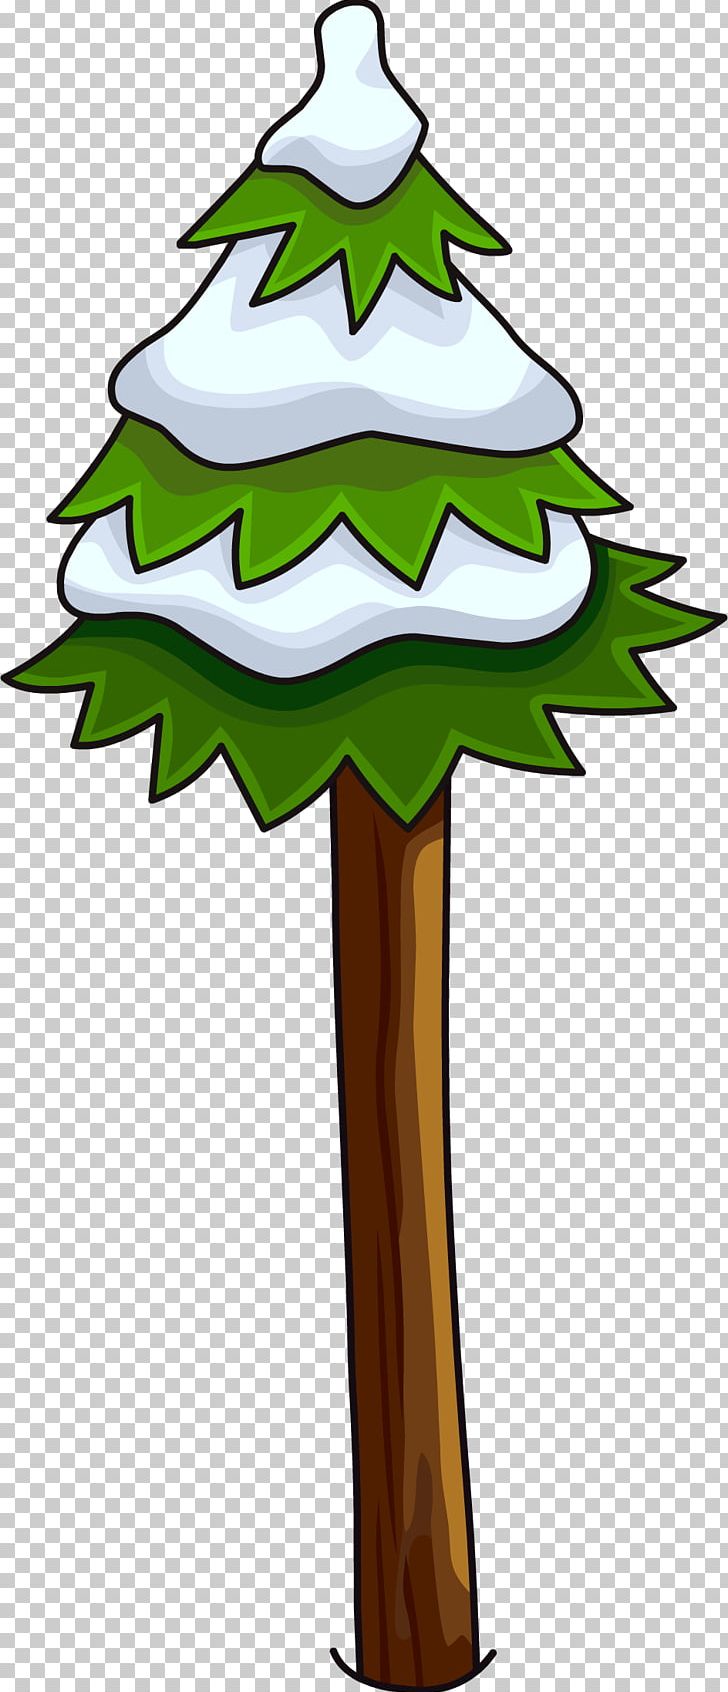 Tree Club Penguin Pine Igloo PNG, Clipart, Club Penguin, Coconut Tree, Conifer, Conifers, Evergreen Free PNG Download